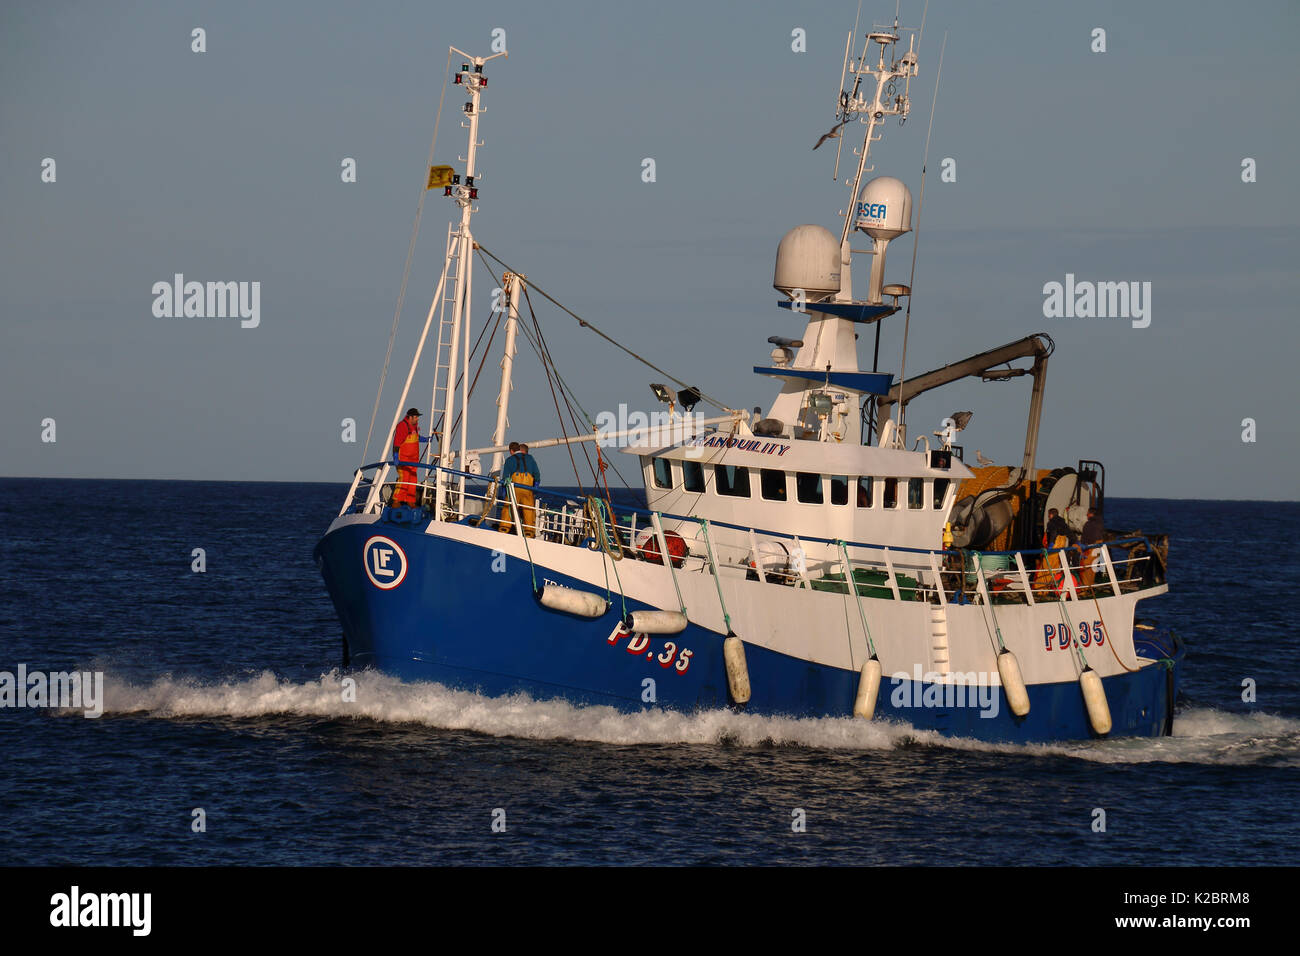 Fishing vessel 'Tranquility', North Sea, September 2014.  All non-editorial uses must be cleared individually. Stock Photo